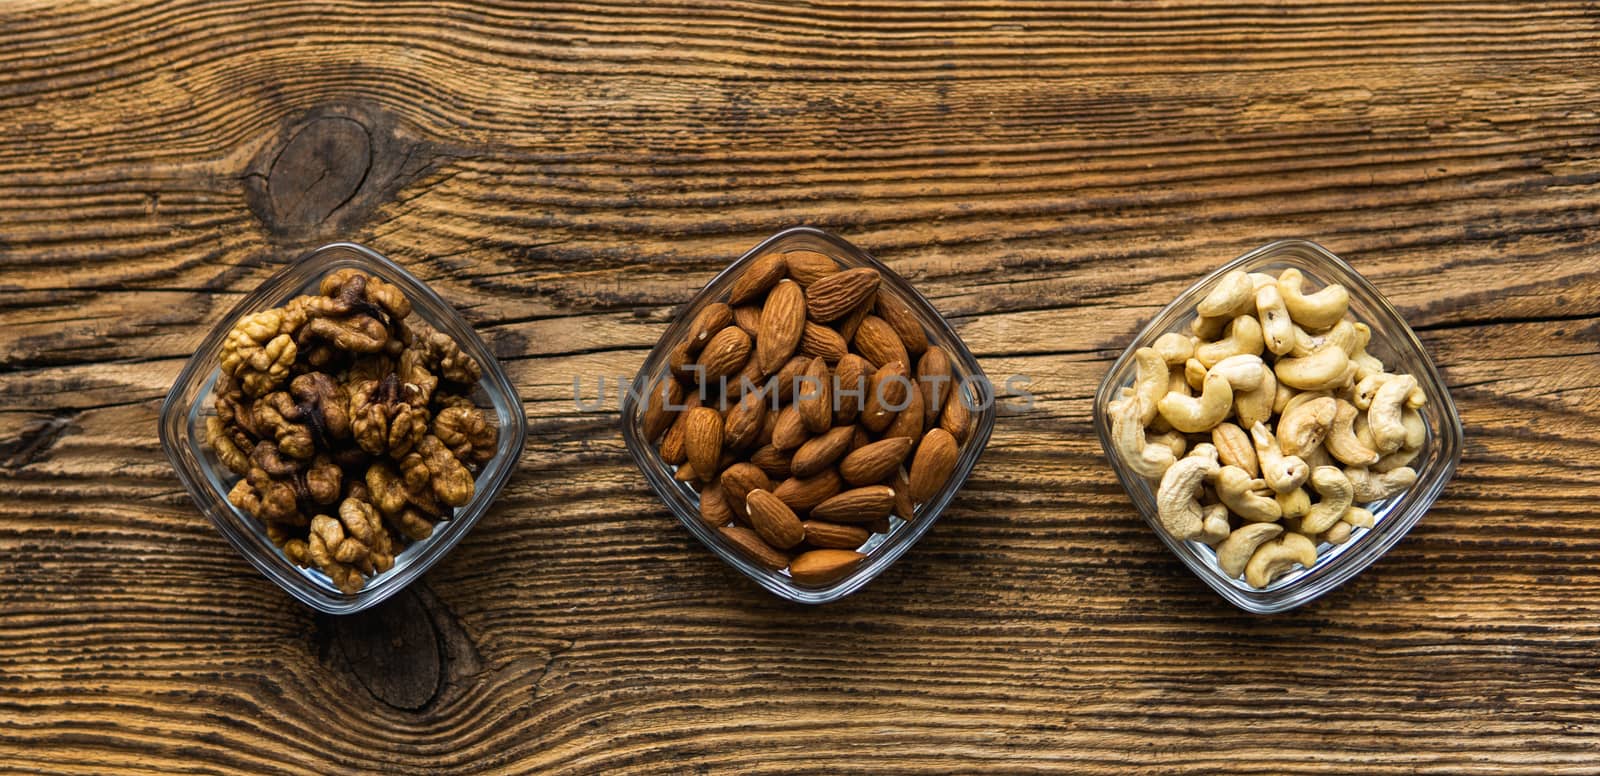 Almond, walnut and cashew in a small plates which standing on a wooden vintage table. Nuts is a healthy vegetarian protein and nutritious food. Nuts on rustic old wood. by vovsht